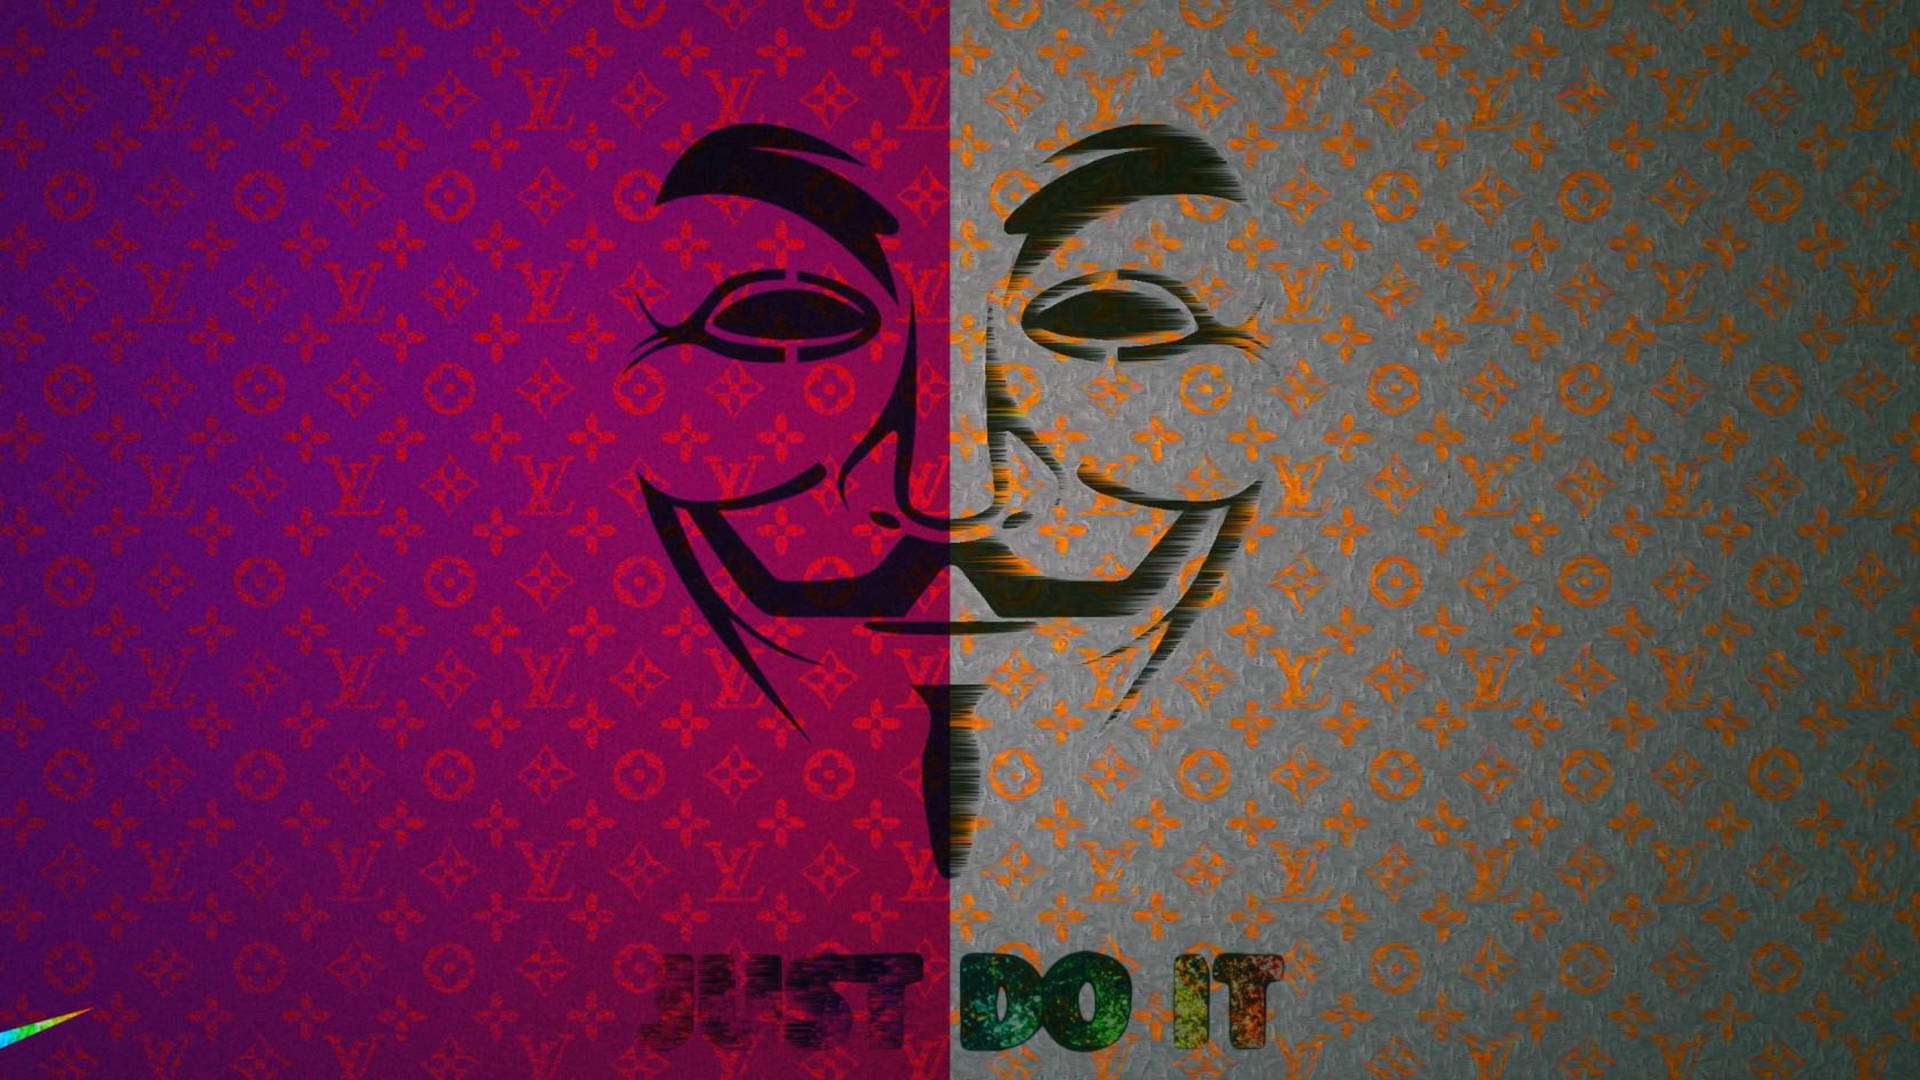 Empowerment through Anonymity - Featuring Just Do It and Vendetta Art Wallpaper